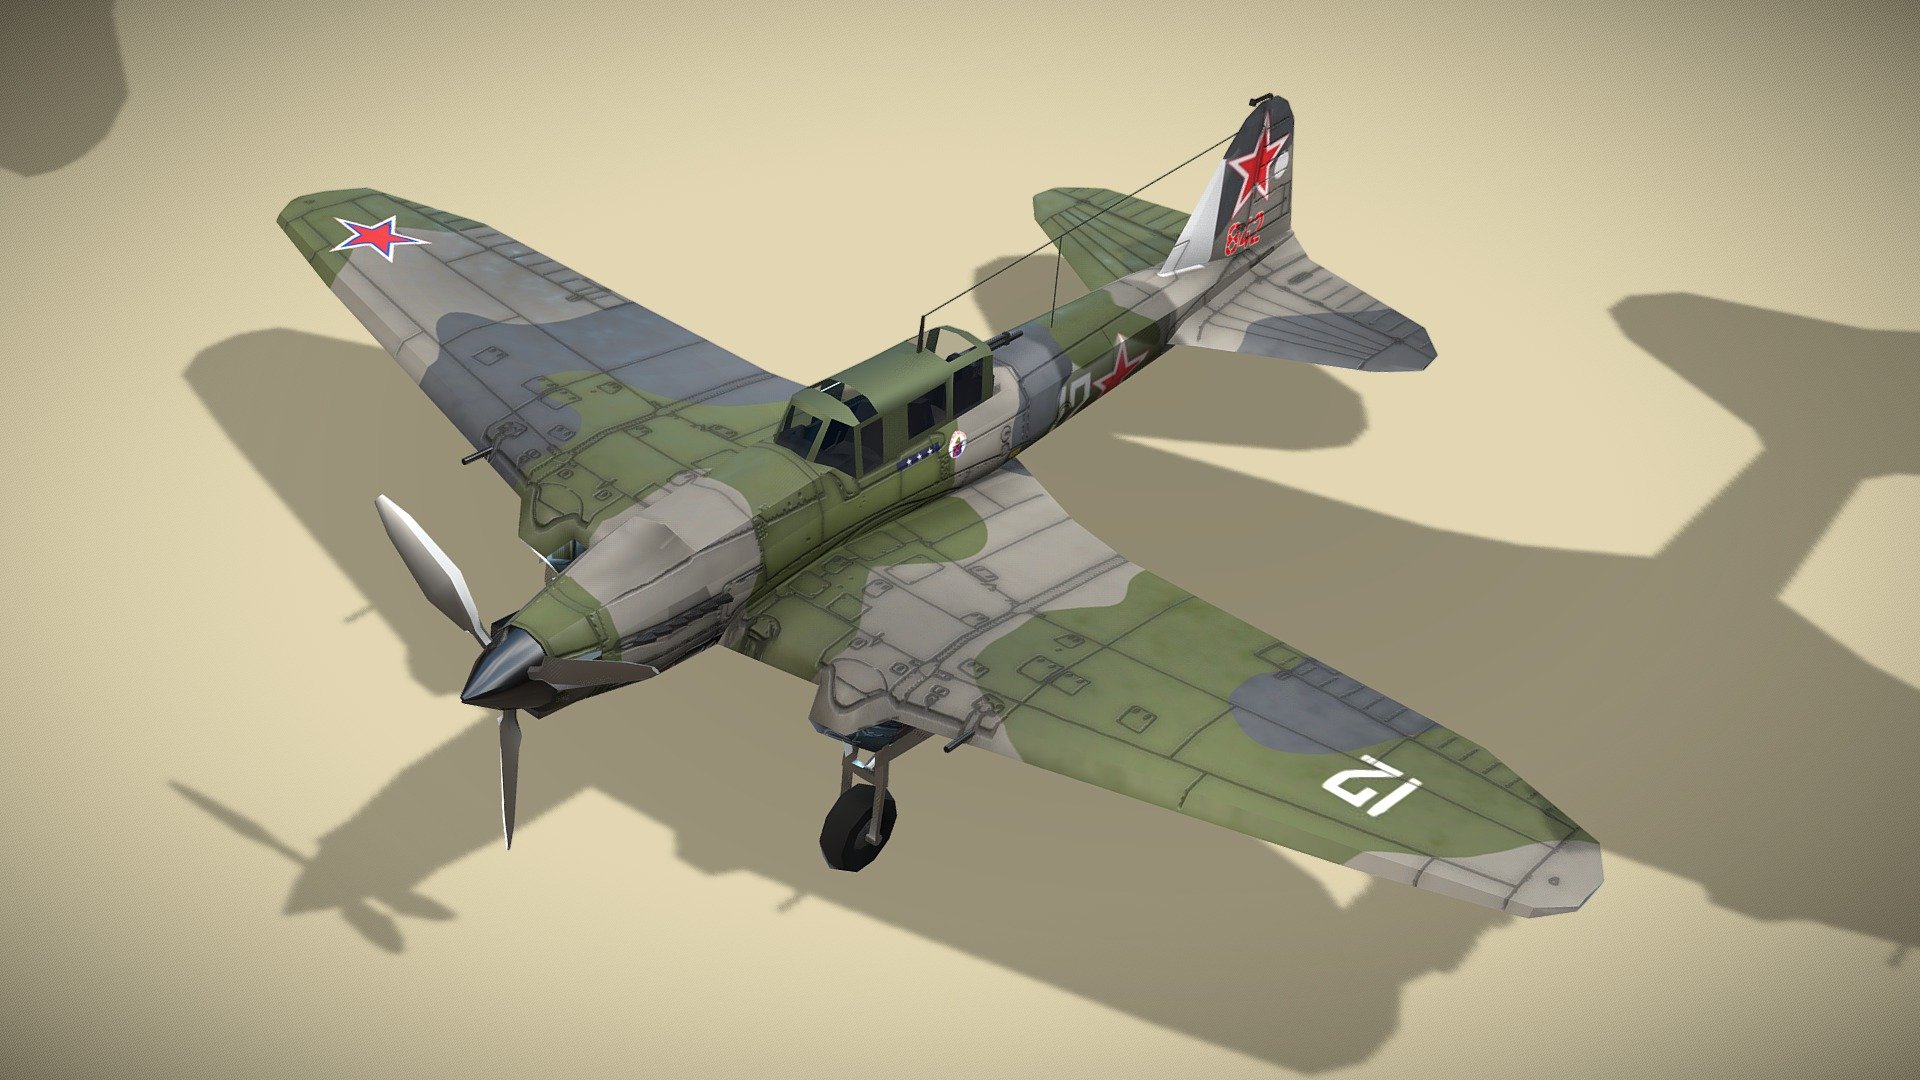 Ilyushin Il-2 Sturmovik

Lowpoly model of soviet fighter plane.



The Ilyushin Il-2 Sturmovik is a ground-attack aircraft produced by the Soviet Union in large numbers during the Second World War. The Il-2 was never given an official name and &lsquo;sturmovik' is the generic Russian word meaning ground attack aircraft.

During the war, 36,183 units of the Il-2 were produced, and in combination with its successor, the Ilyushin Il-10, a total of 42,330 were built, making it the single most produced military aircraft design in aviation history, as well as one of the most produced piloted aircraft in history along with the American postwar civilian Cessna 172 and the Soviet Union's own then-contemporary Polikarpov Po-2 Kukuruznik biplane.



1 standing version and 2 flying versions in set

Model has bump map, roughness map and 3 x diffuse textures



Check also my other aircrafts and cars

Patreon with monthly free model - Ilyushin IL-2 Sturmovik - Buy Royalty Free 3D model by NETRUNNER_pl 3d model